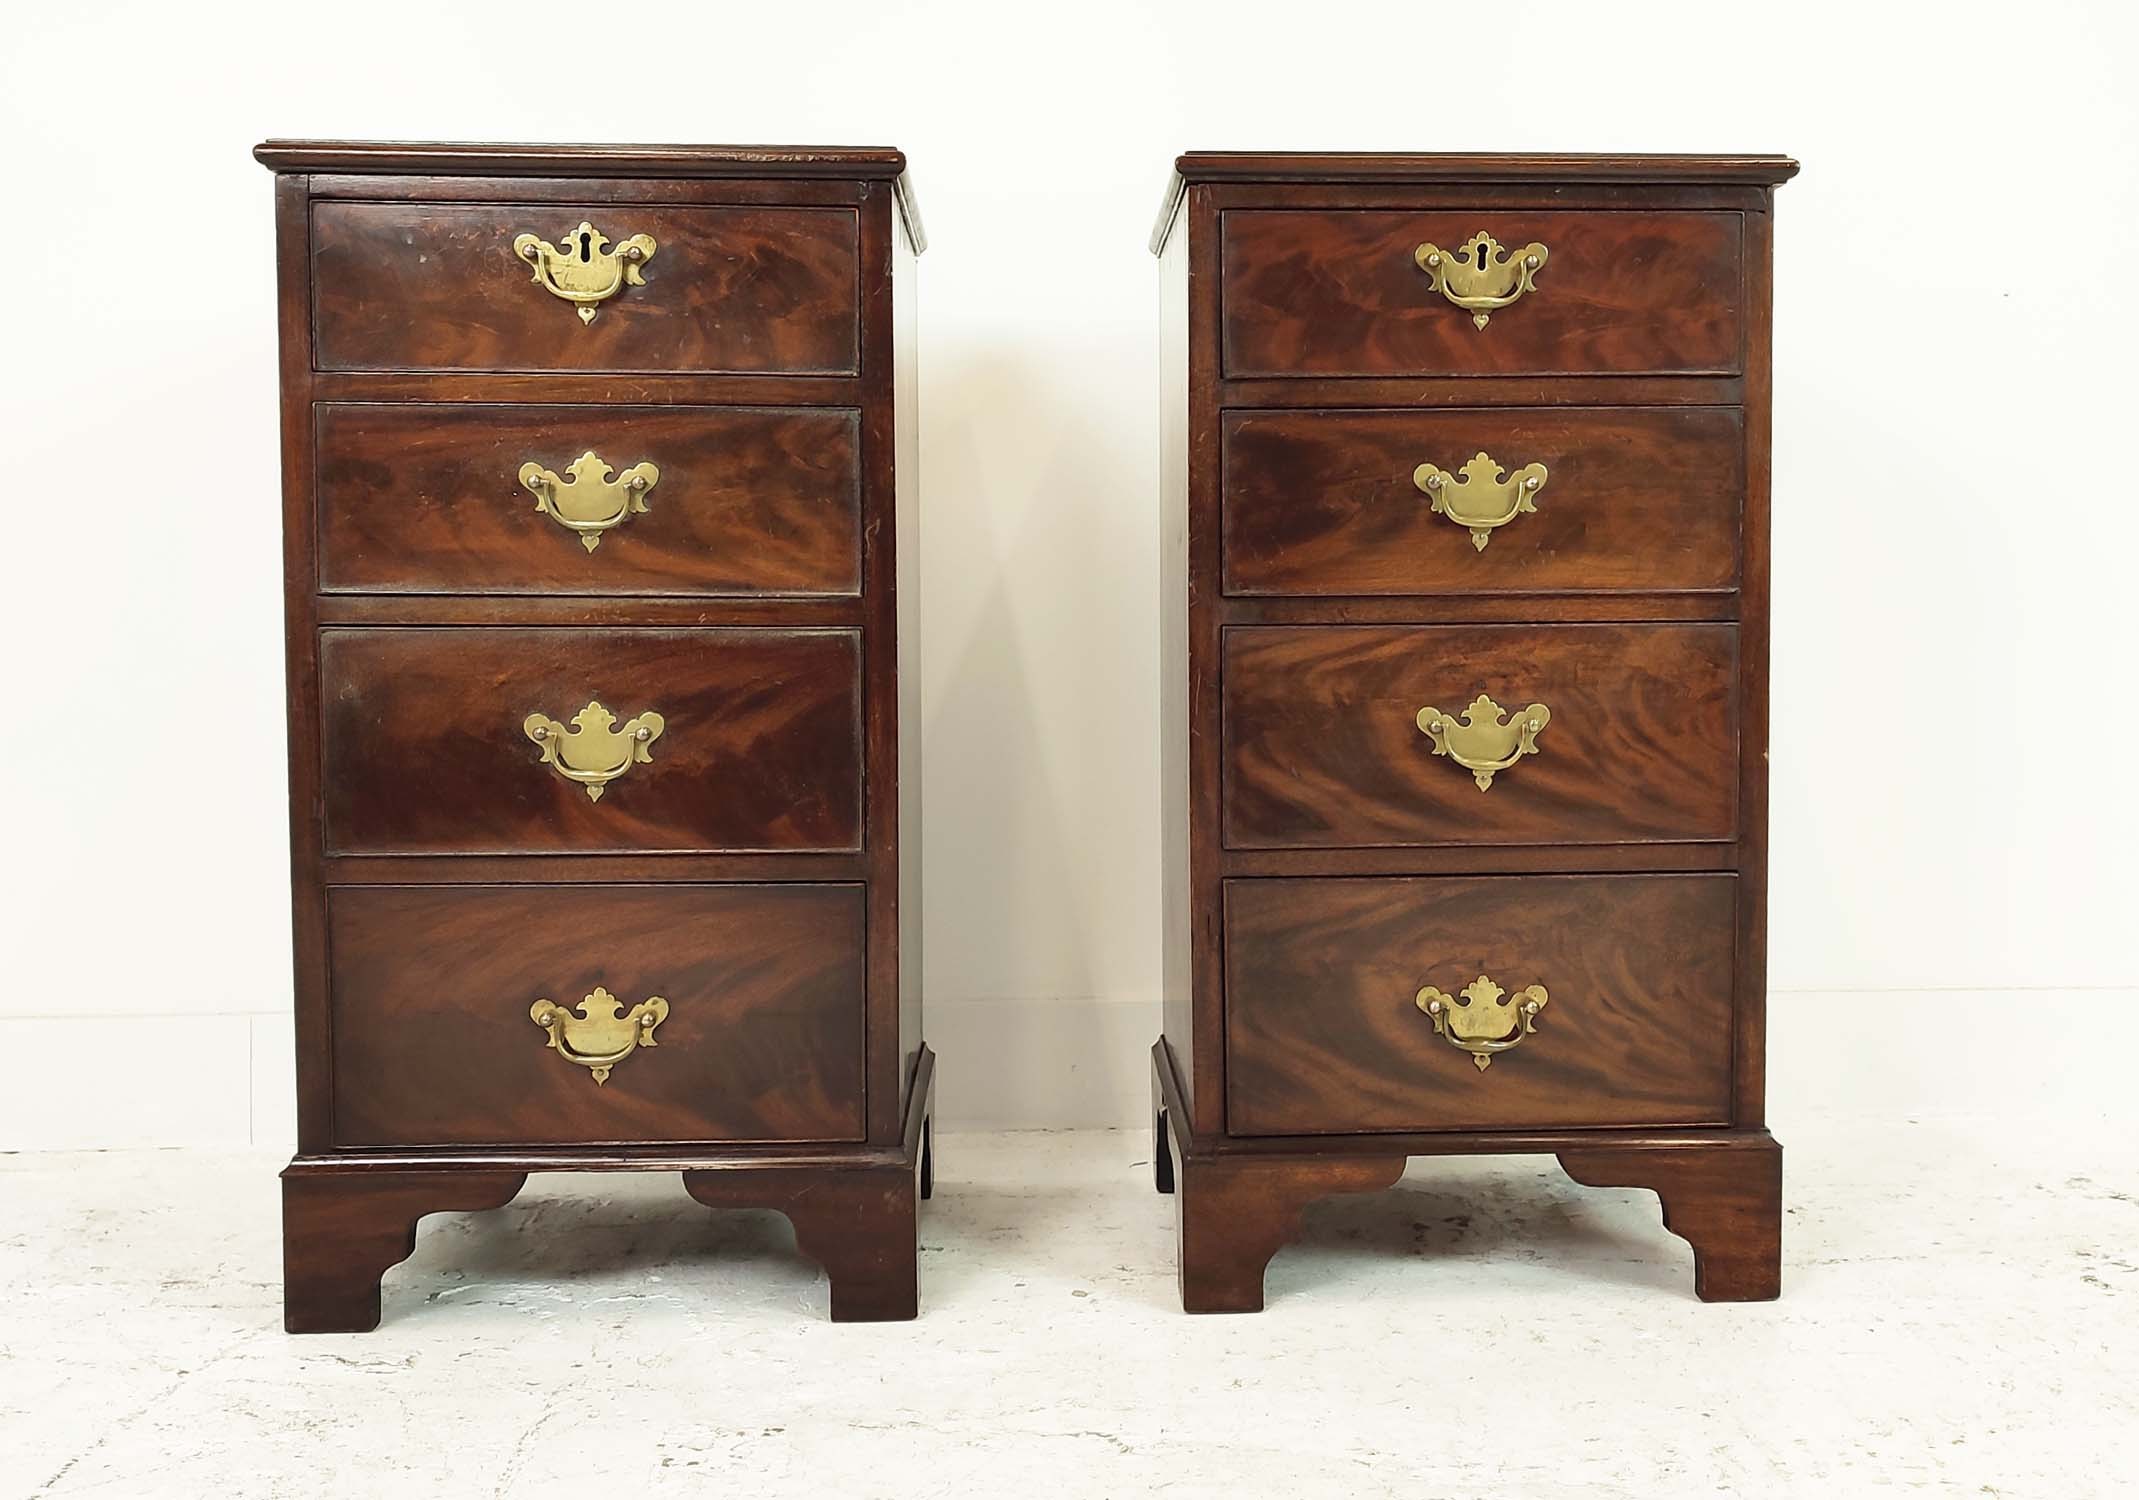 BEDSIDE CHESTS, a pair, late 19th/early 20th century mahogany, labelled S & H Jewel of four drawers, - Image 2 of 8